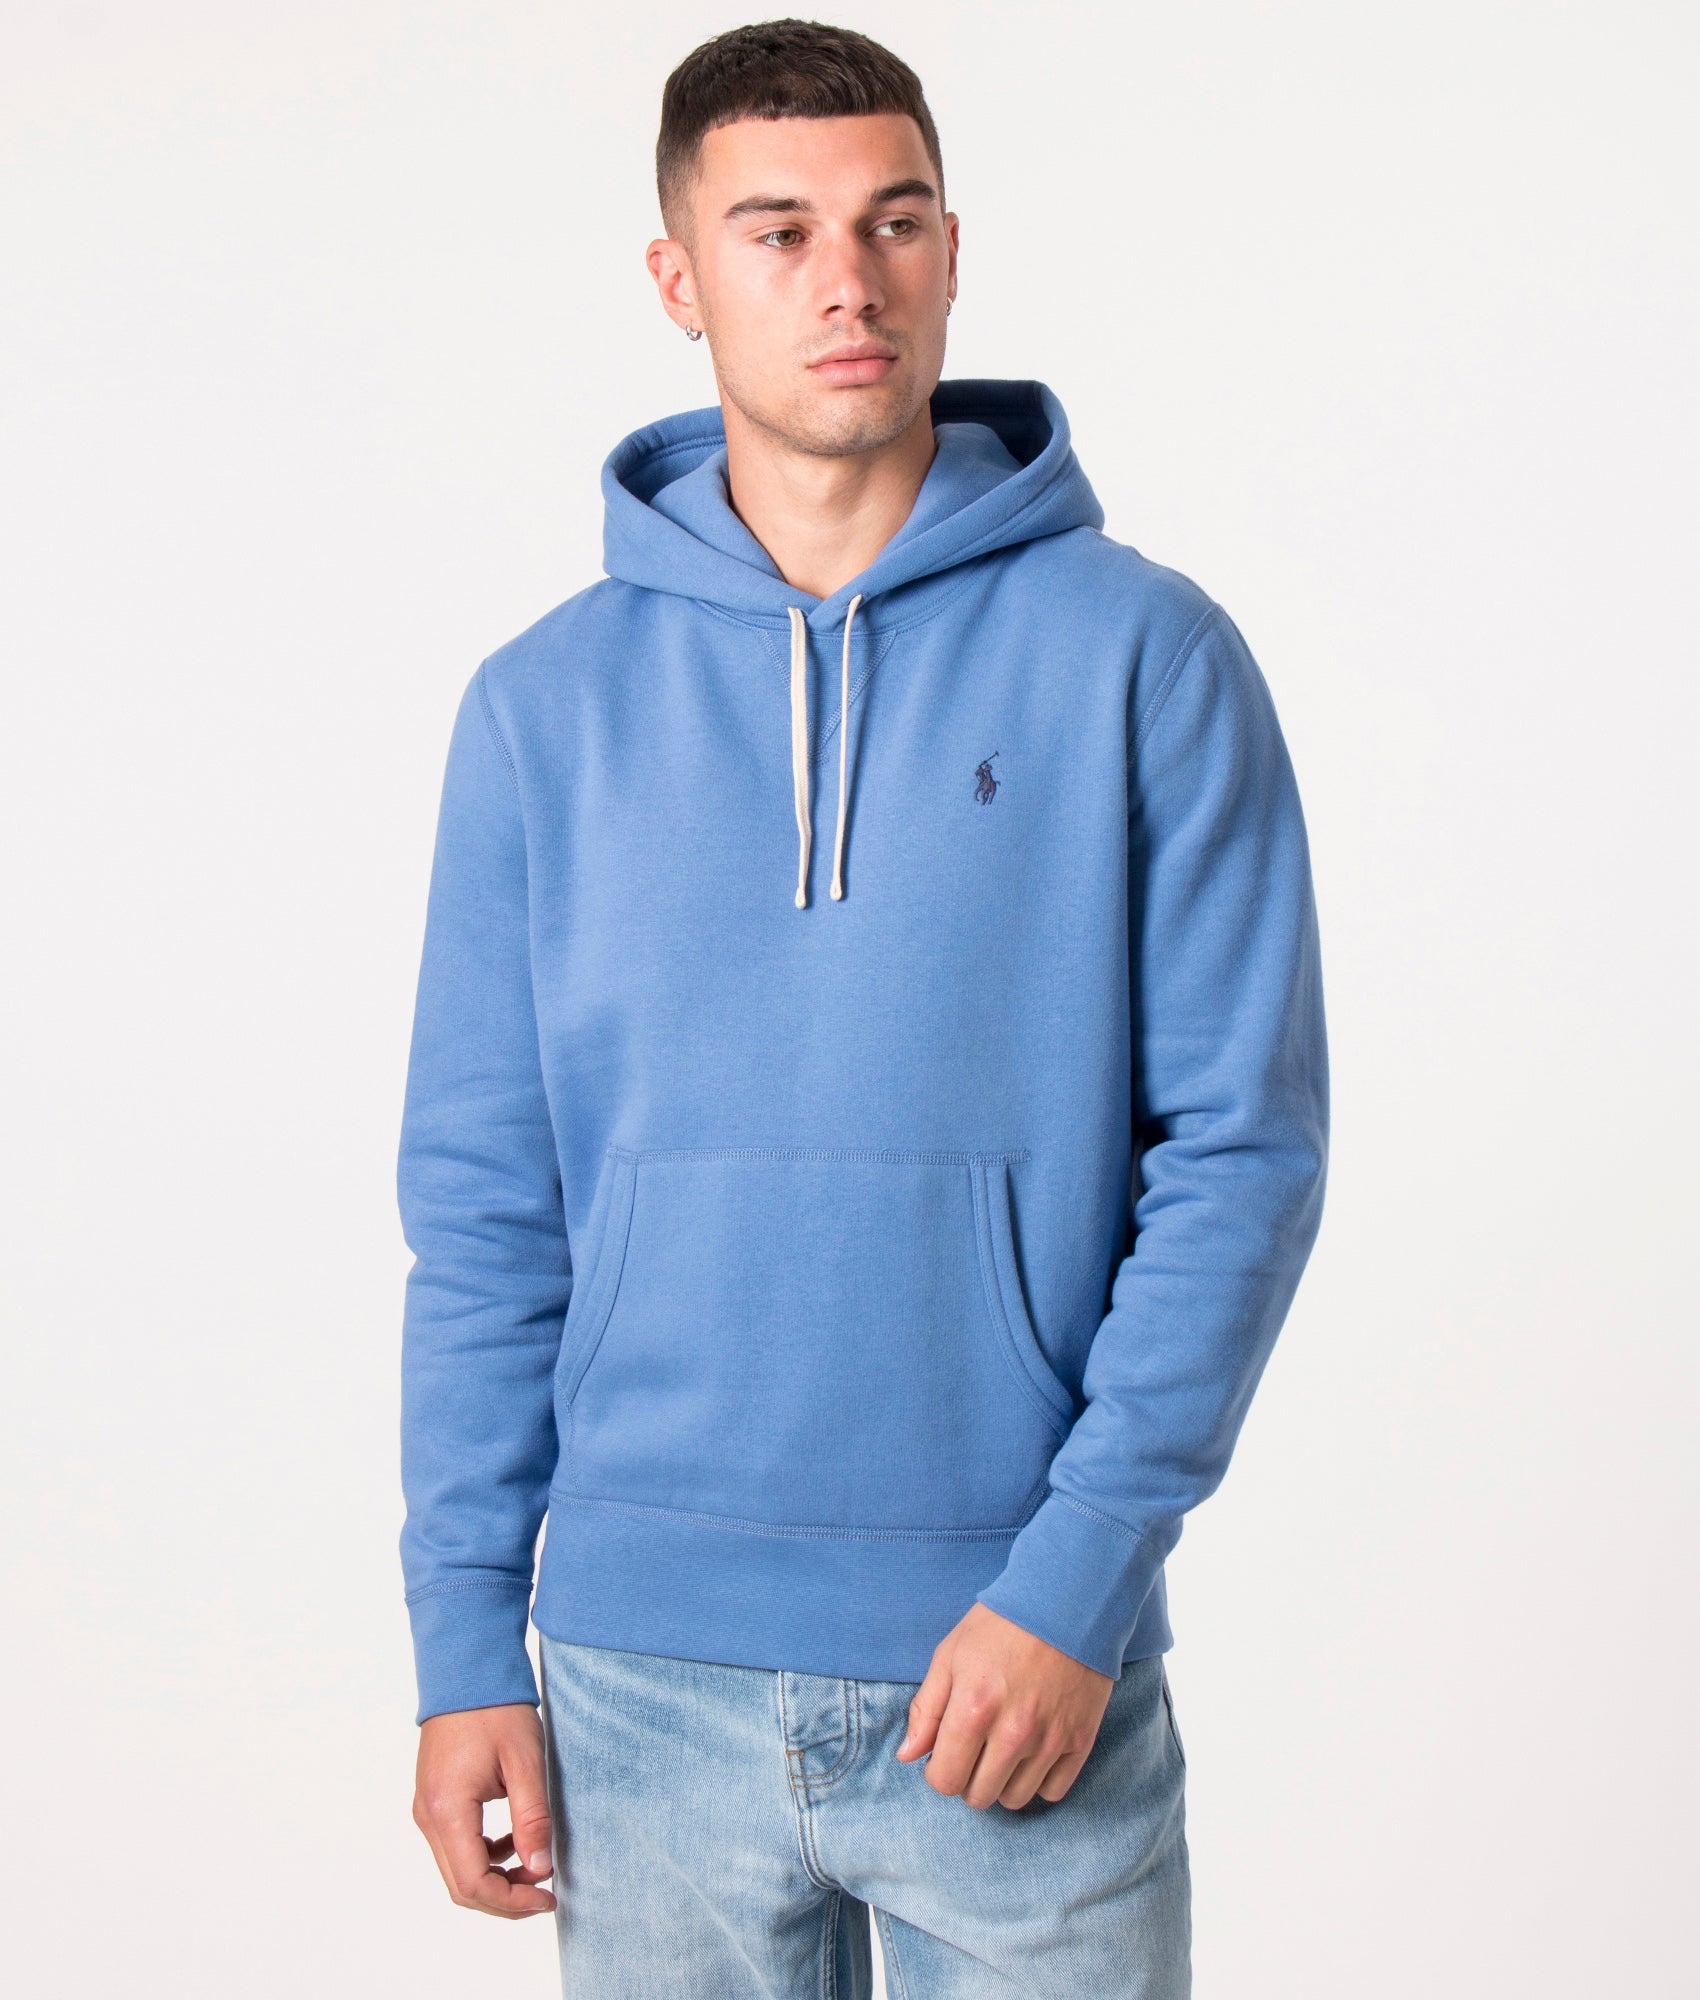 Polo Ralph Lauren Mens Relaxed Fit RL Fleece Hoodie - Colour: 079 Nimes Blue - Size: Large